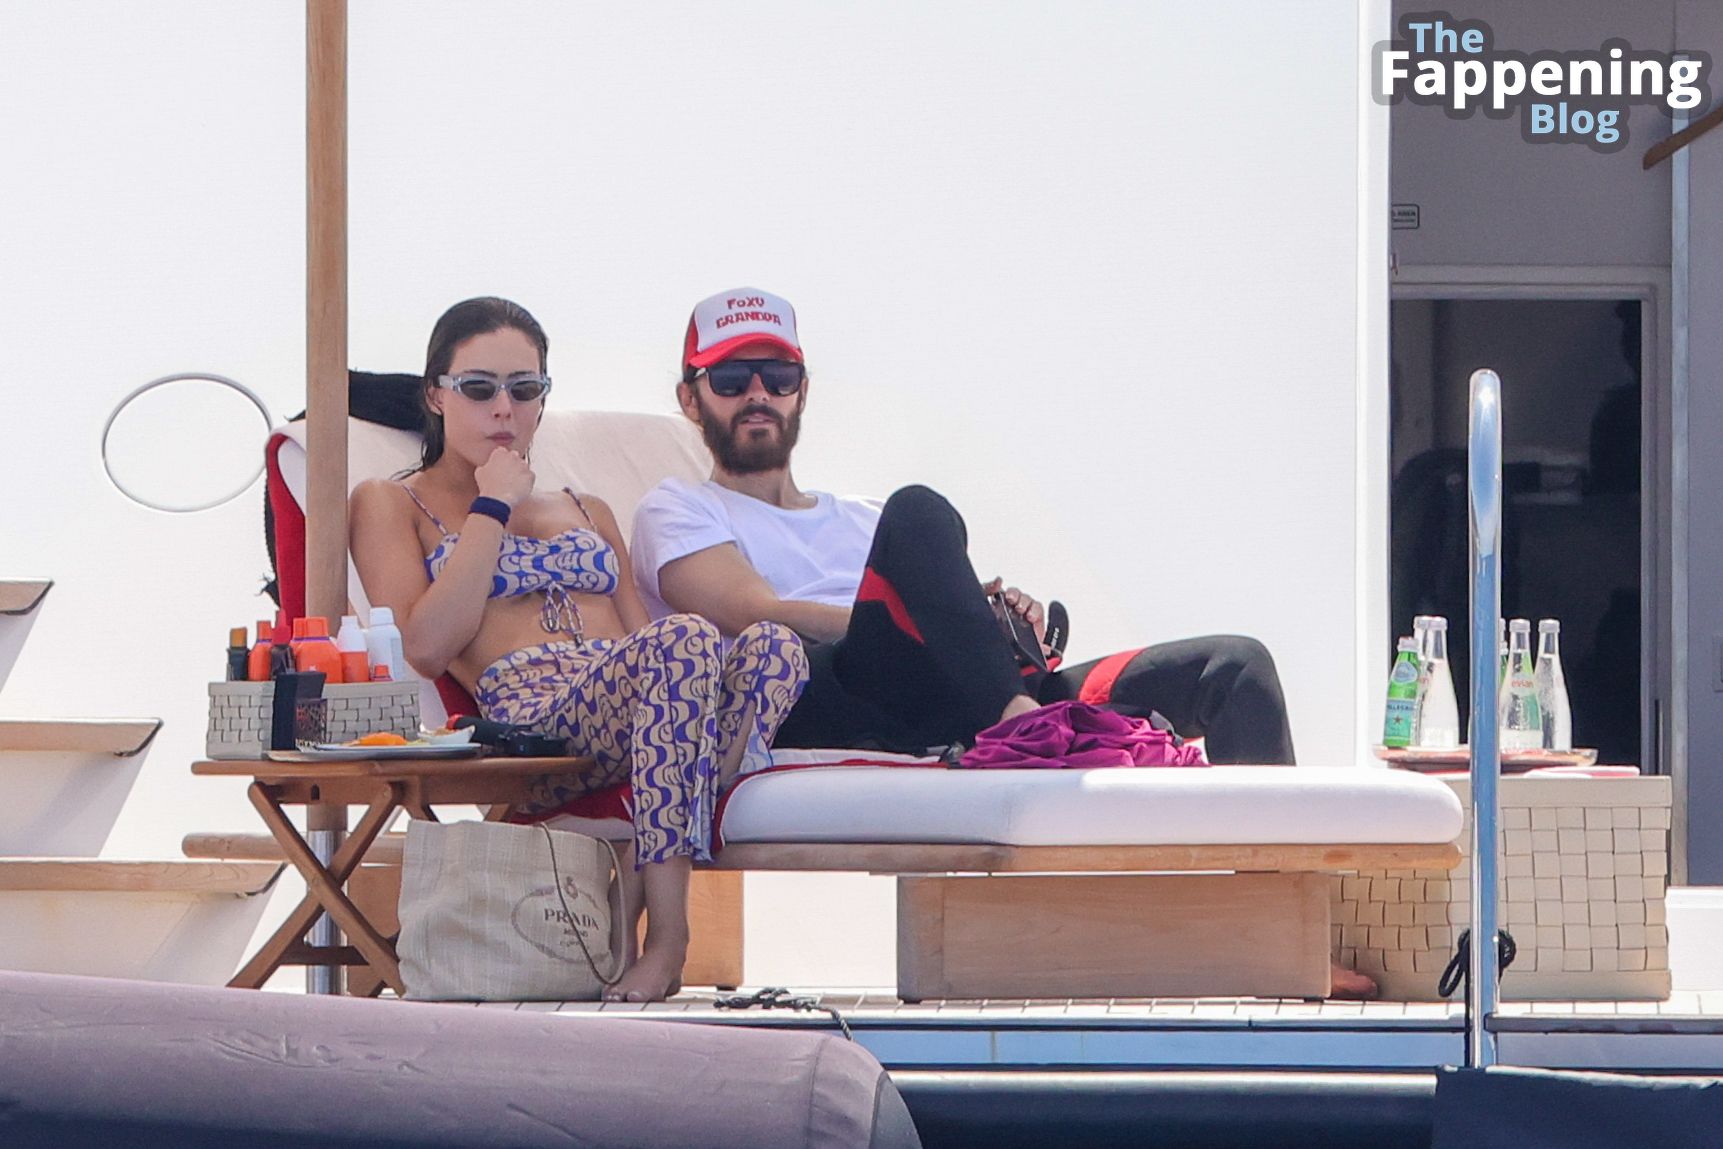 Carol Mendes &amp; Jared Leto Enjoy a Vacation with Friends in Ibiza (40 Photos)